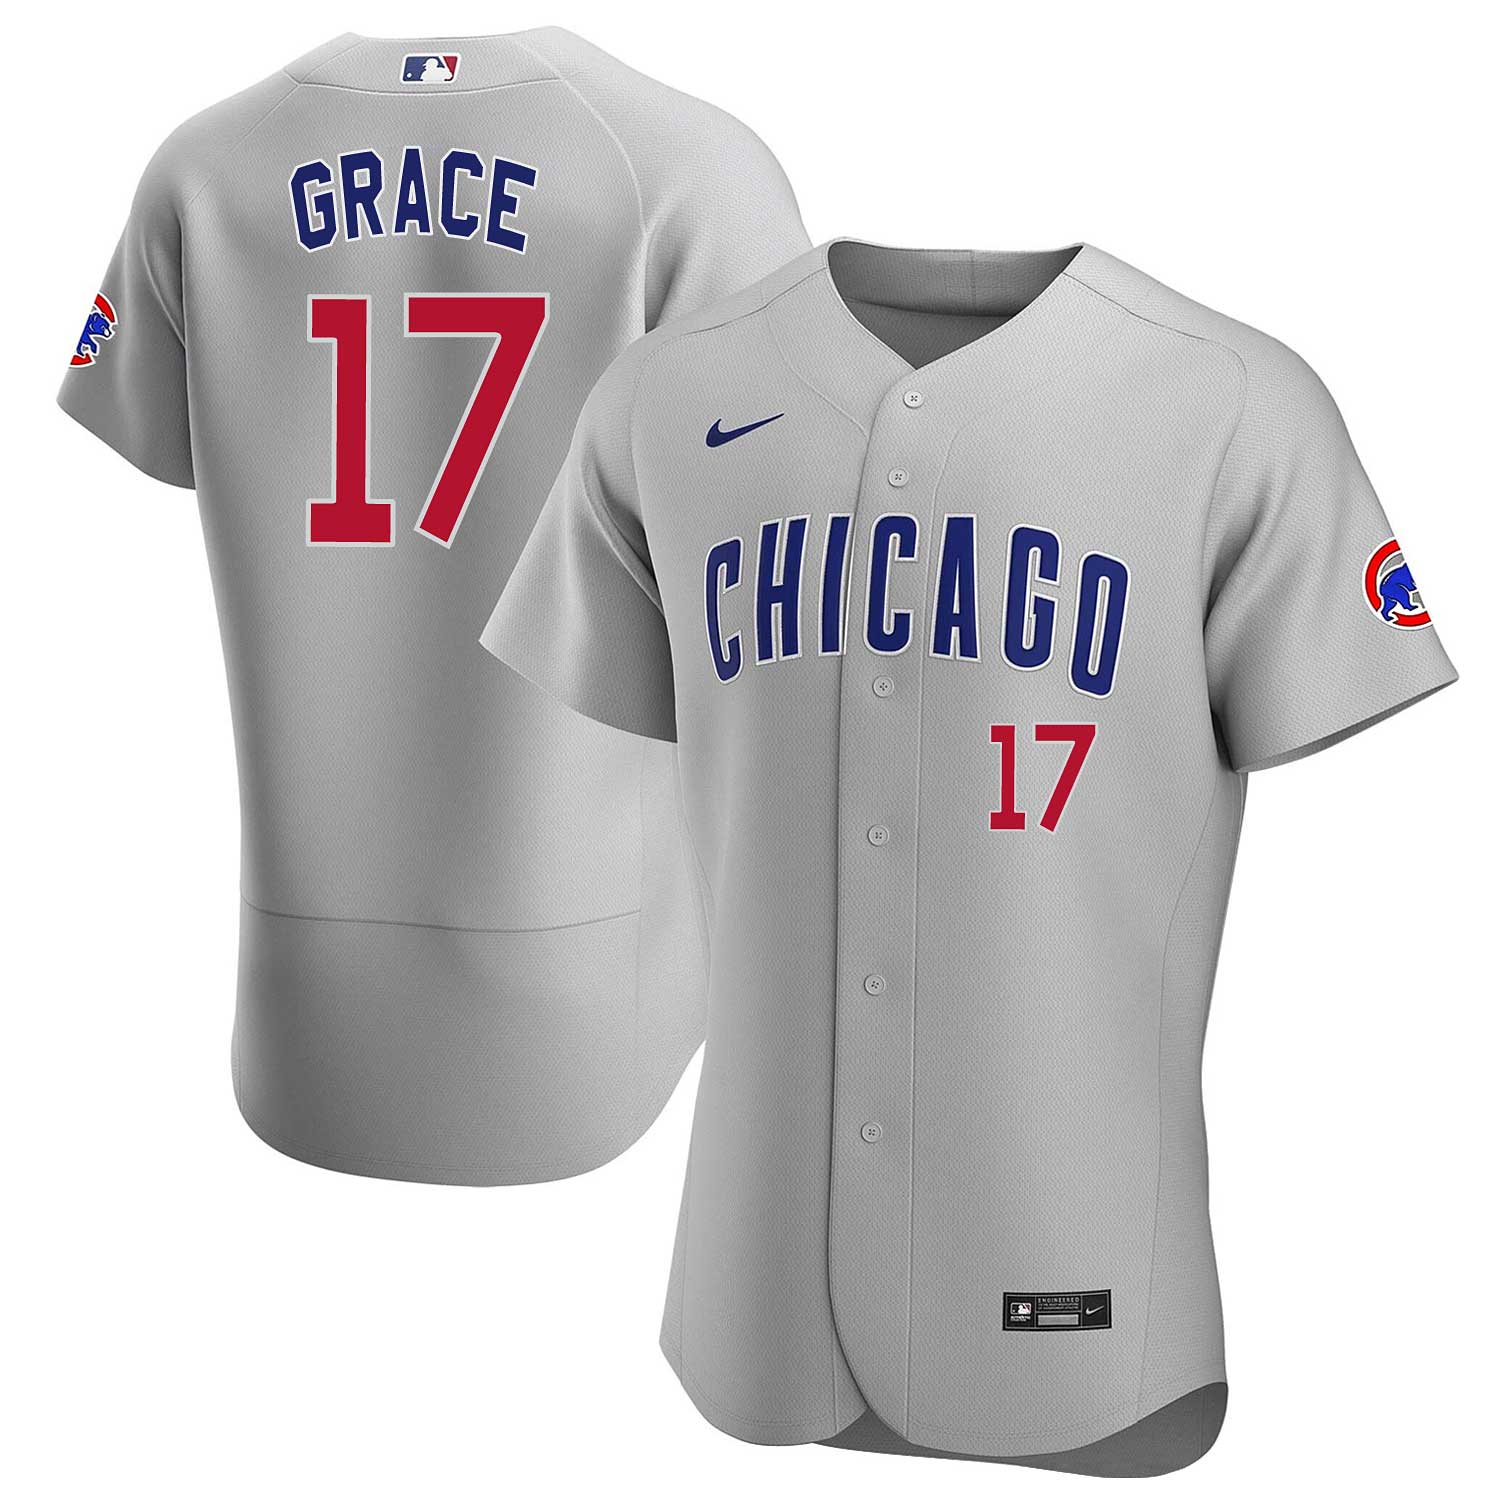 Chicago Cubs Mark Grace Nike Road Authentic Jersey 52 = XX-Large